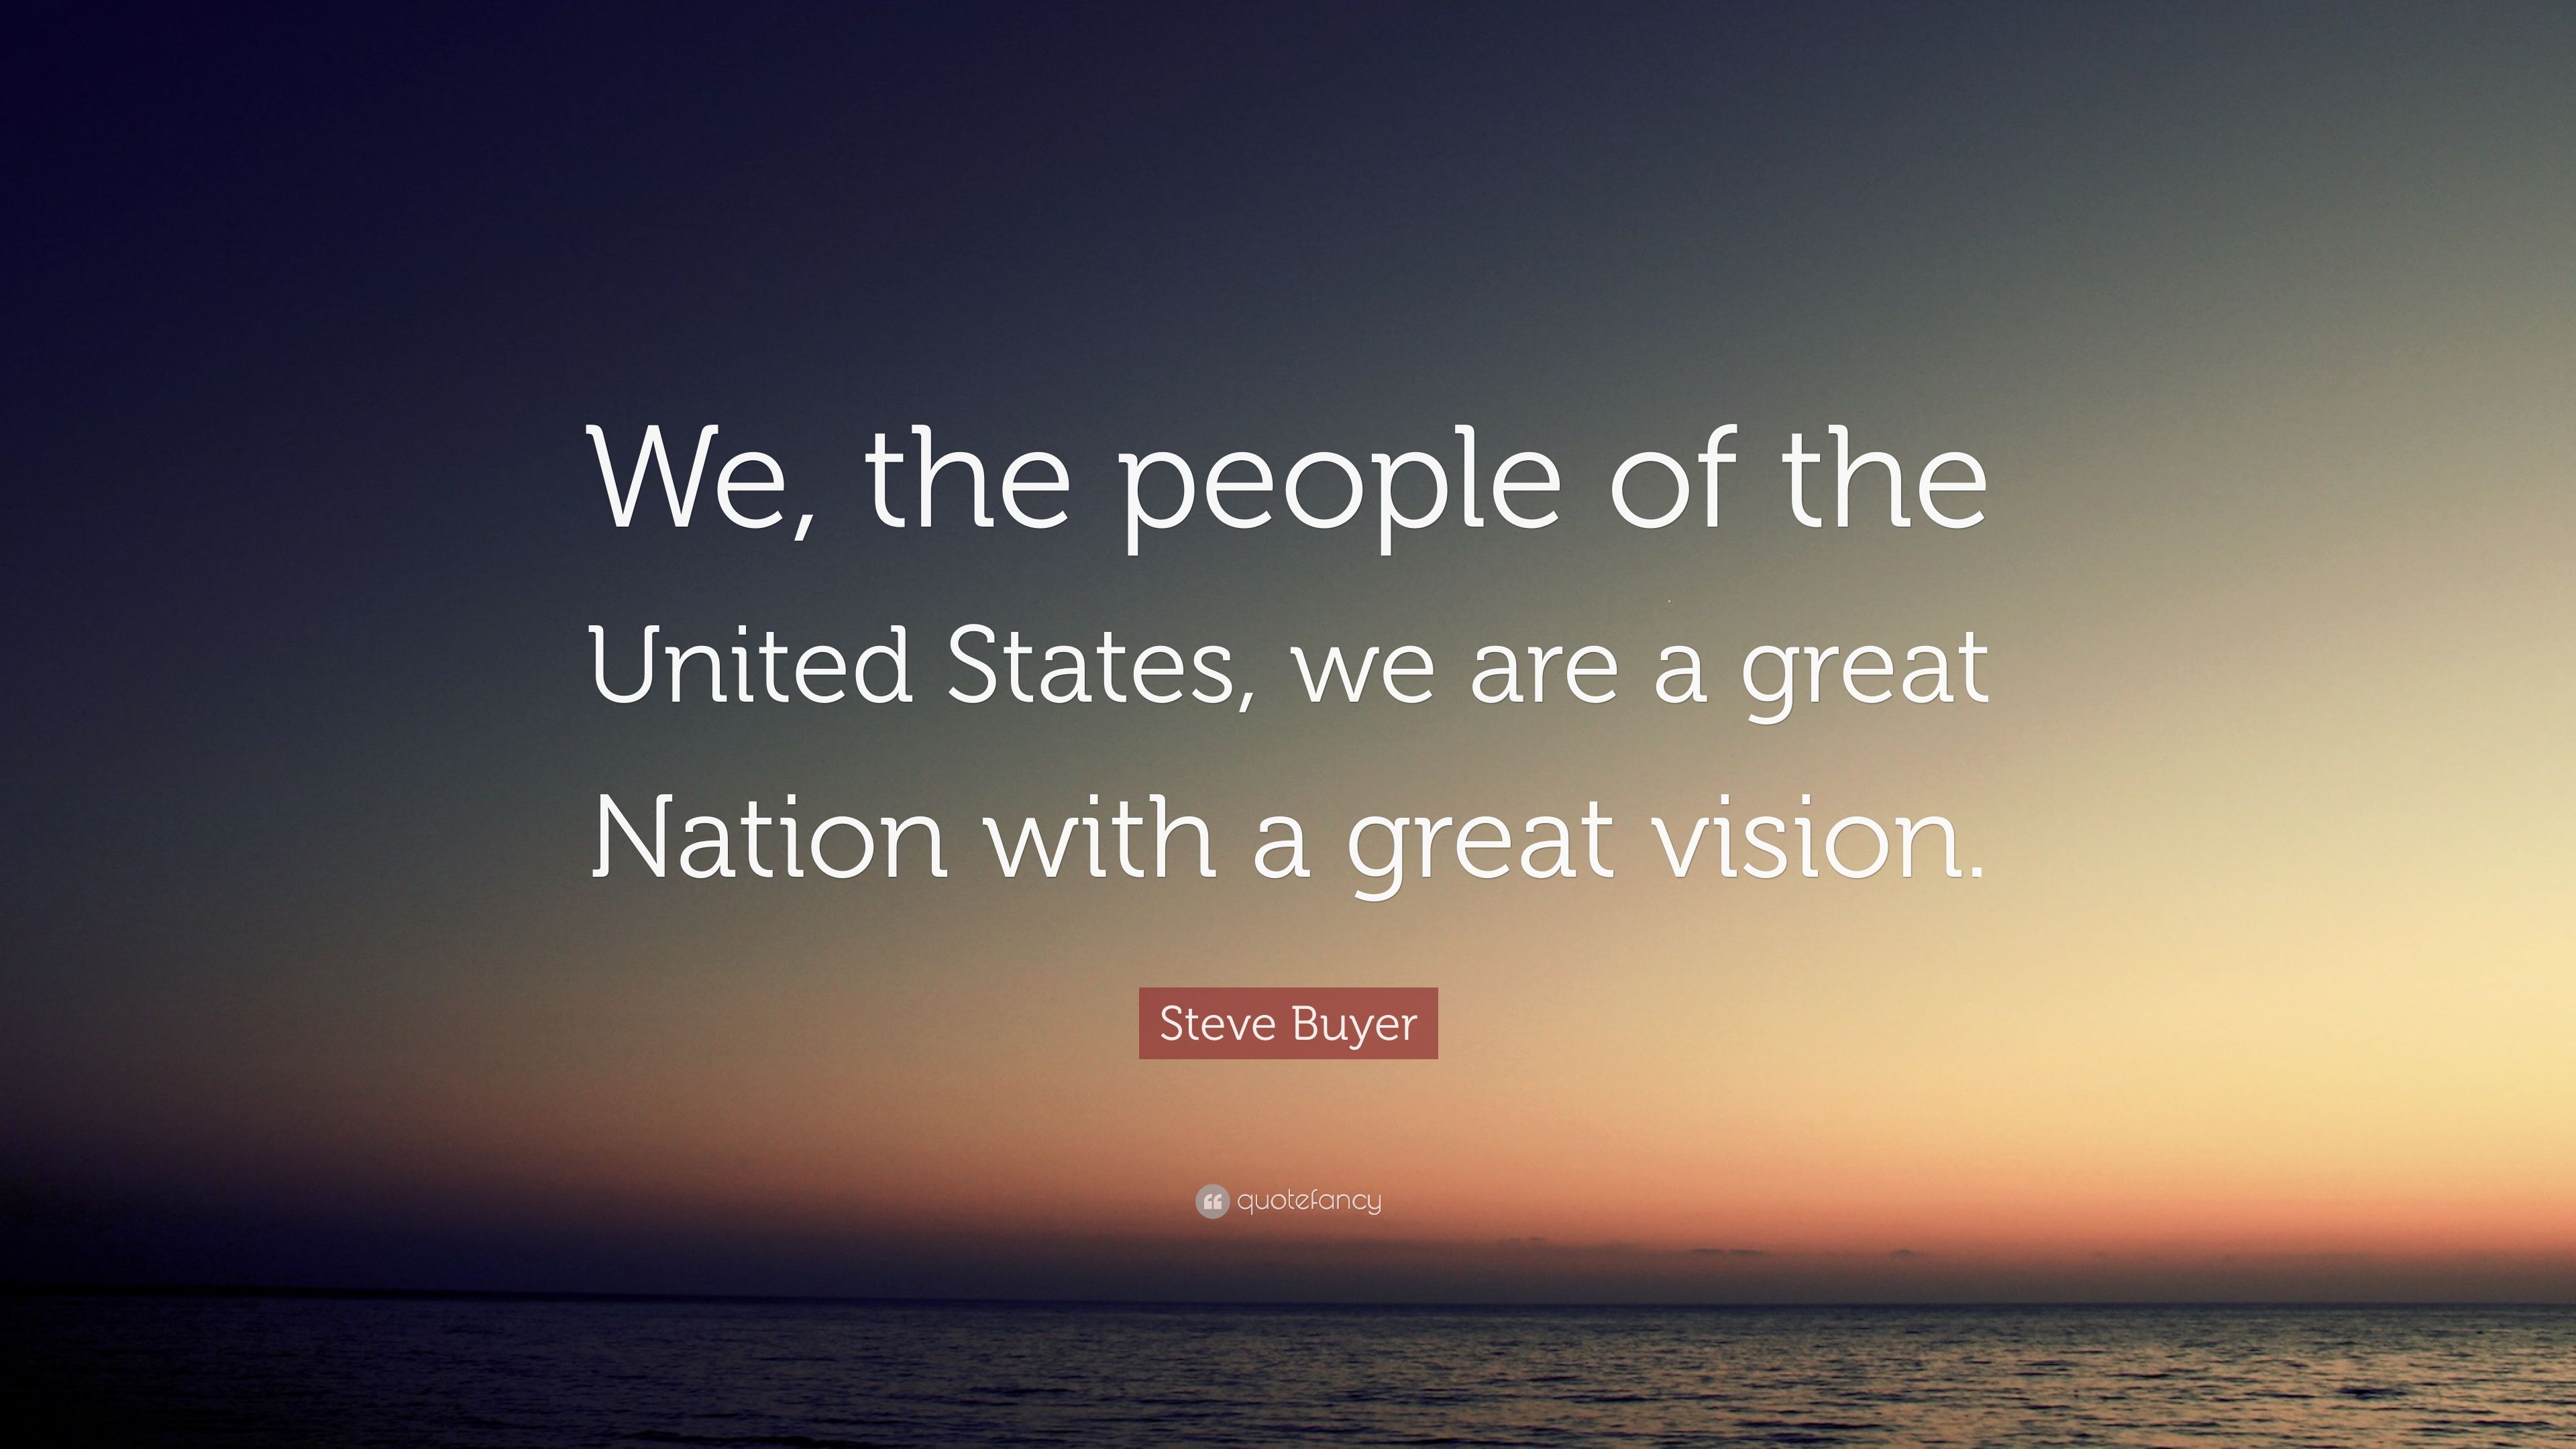 Steve Buyer Quote: “We, the people of the United States, we are a